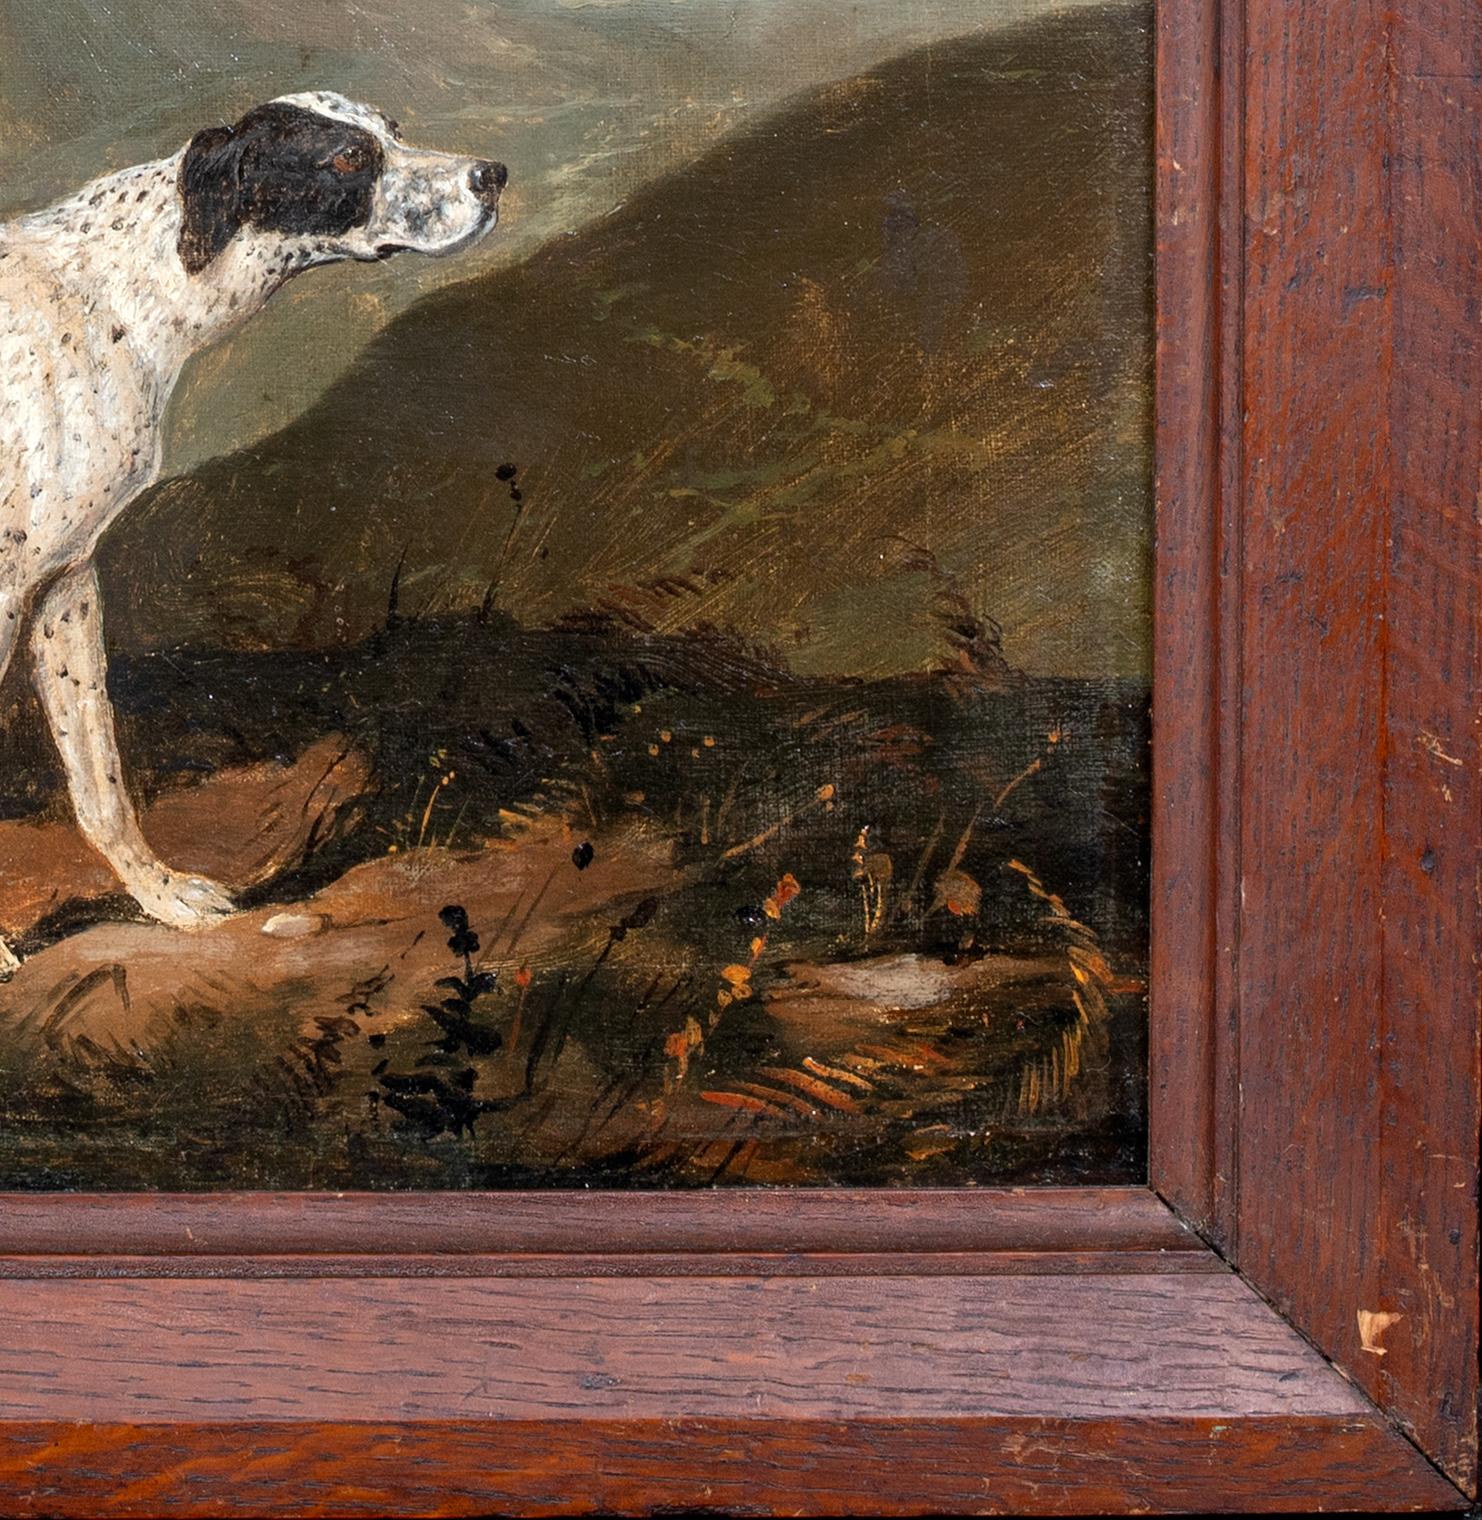 Portrait Of A Pair Of German Shorthaired Pointers, 18th/19th Century 

circle of George STUBBS (1724-1806)

Large 18th/19th Century portrait of a pairs of German Shorthaired Pointers, oil on canvas. Excellent quality and condition early and rare